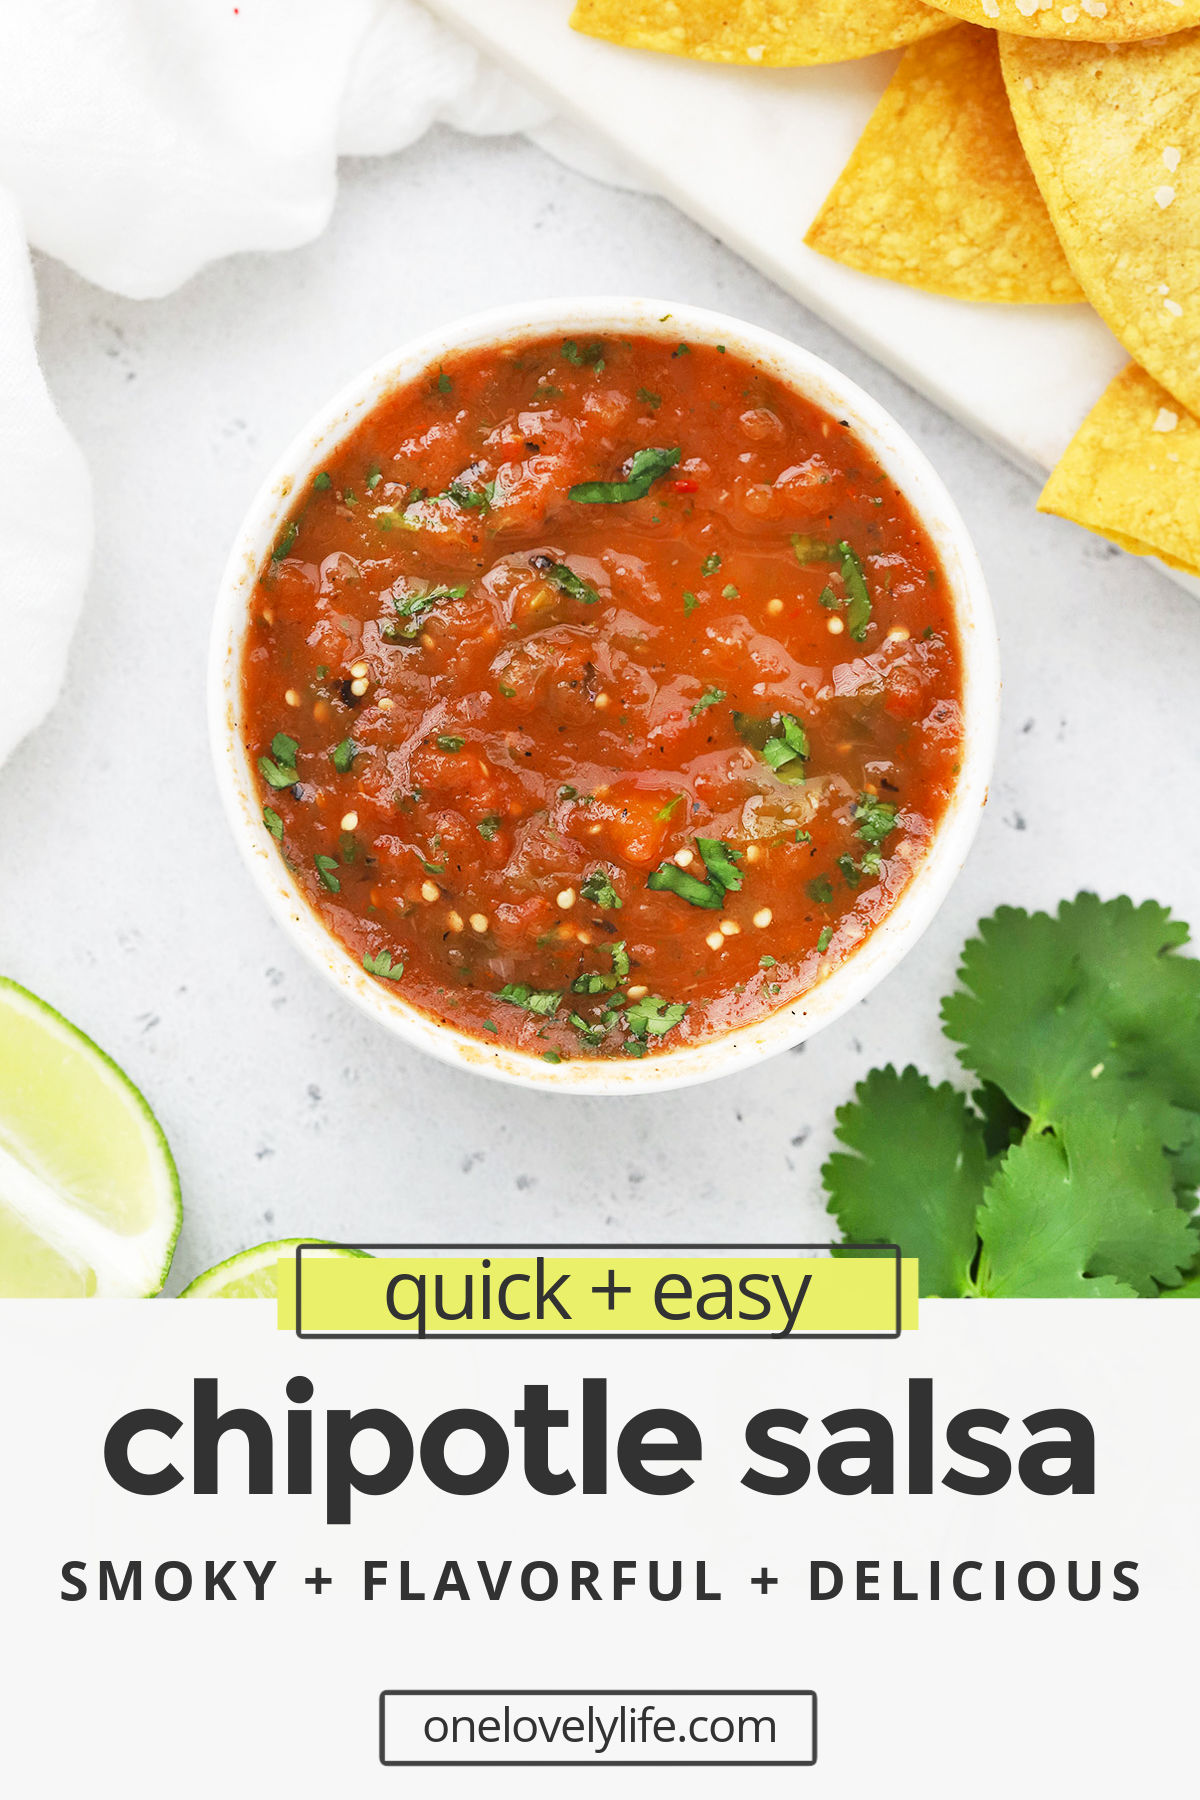 This Smoky Chipotle Salsa rivals our favorite restaurant salsa and tastes good on EVERYTHING. Mexican Restaurant Salsa Recipe // Salsa Roja // Tomato Tomatillo Salsa // Homemade Salsa recipe #salsa #chipotlesalsa #glutenfree #texmex #vegan